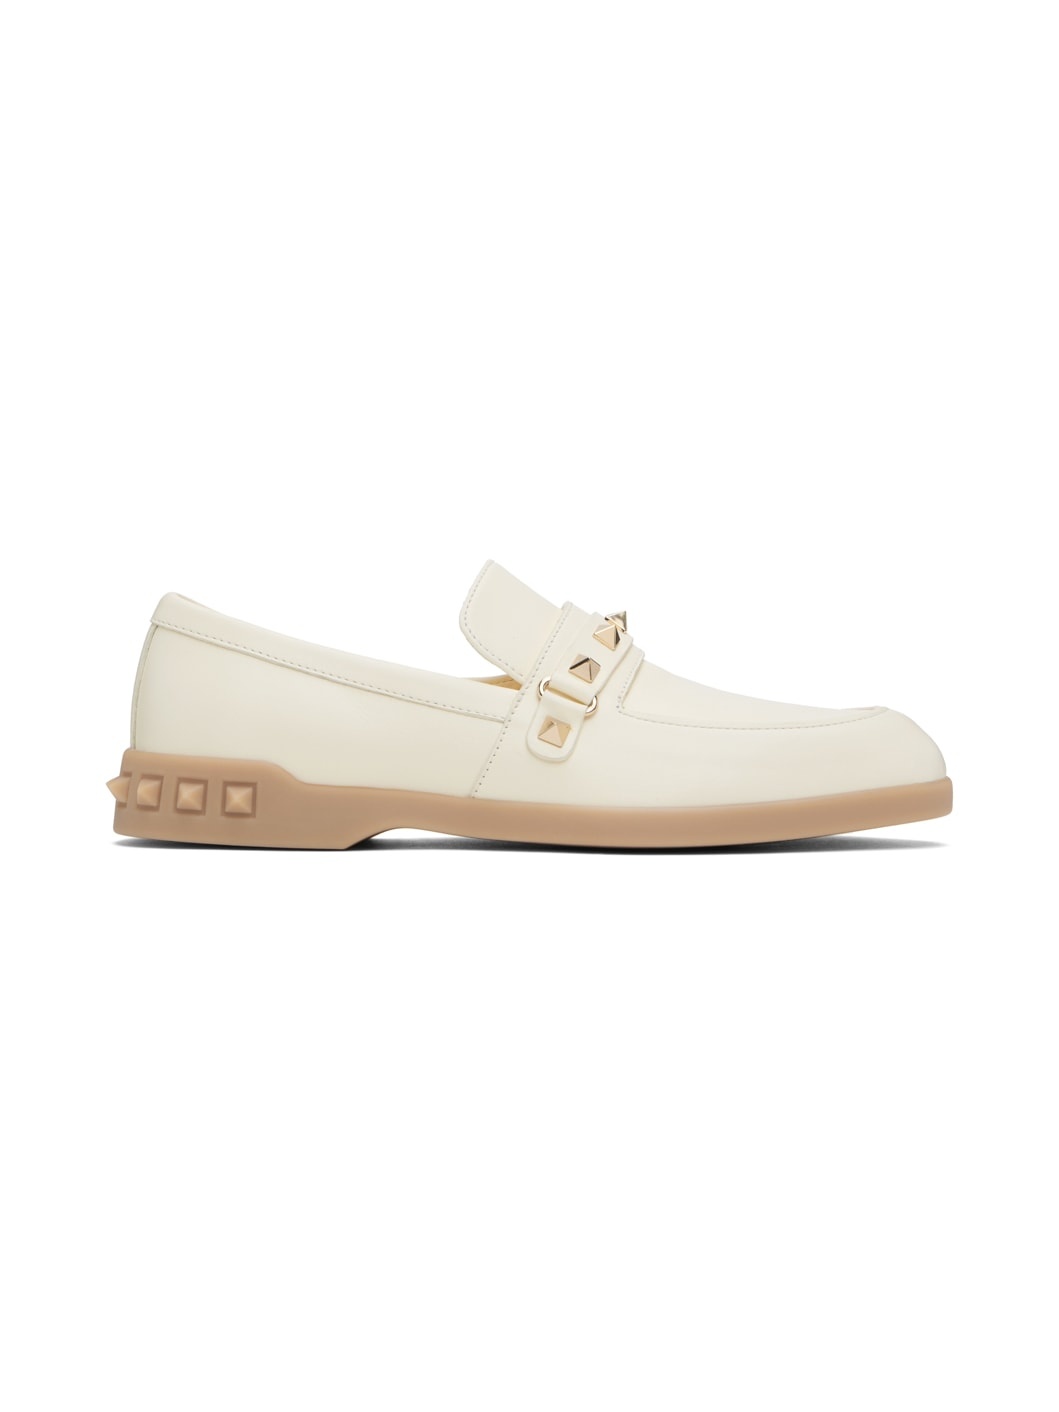 White Leisure Flows Loafers - 1